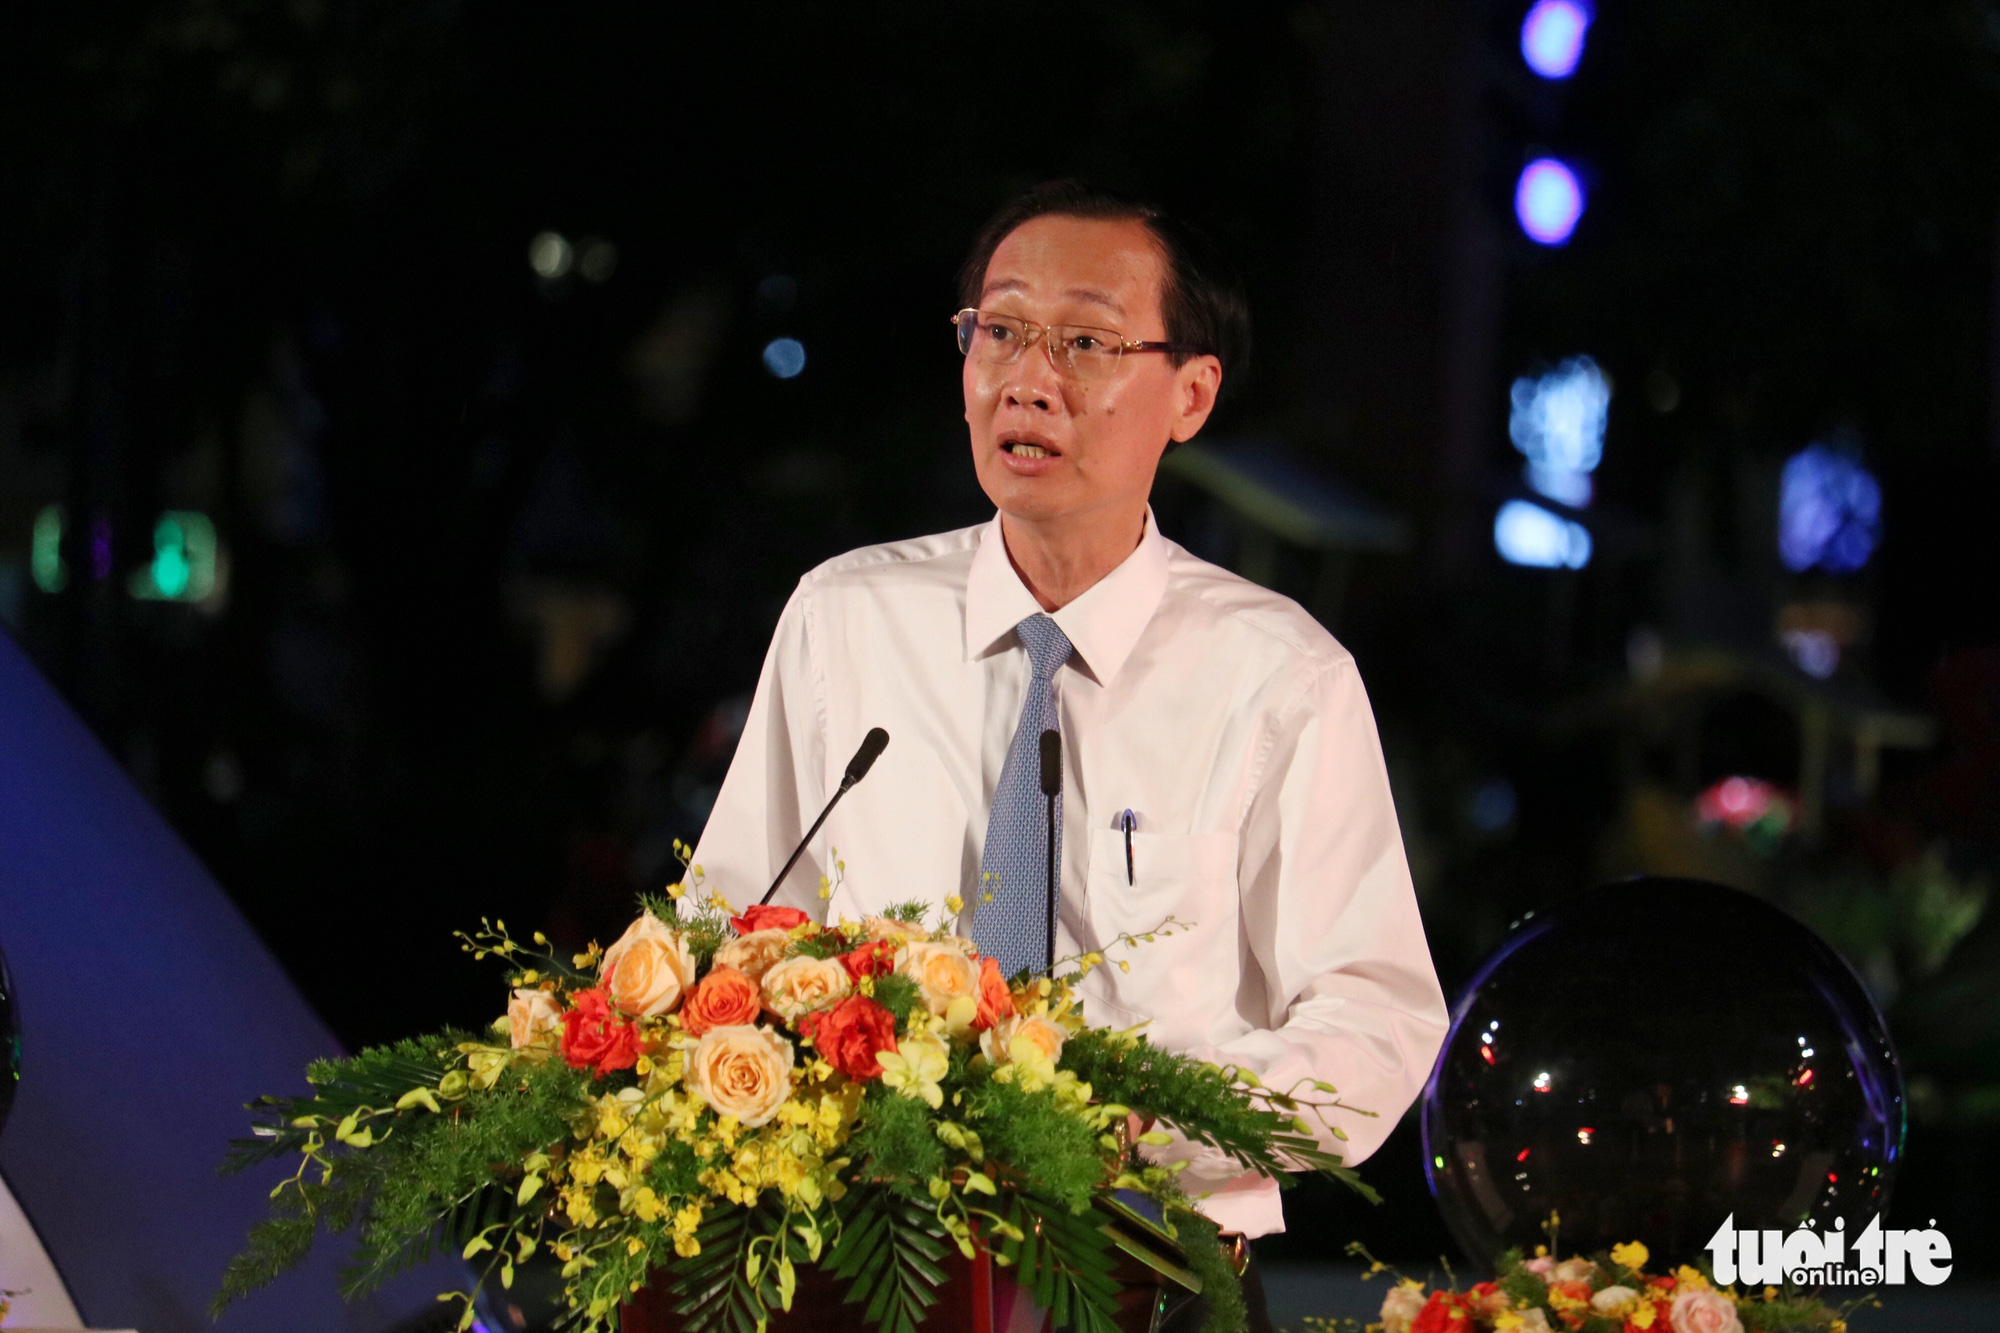 Le Thanh Liem, vice-chairman of the Ho Chi Minh City People’s Committee, speaks at the event on June 27, 2020. Photo: Ngoc Phuong / Tuoi Tre